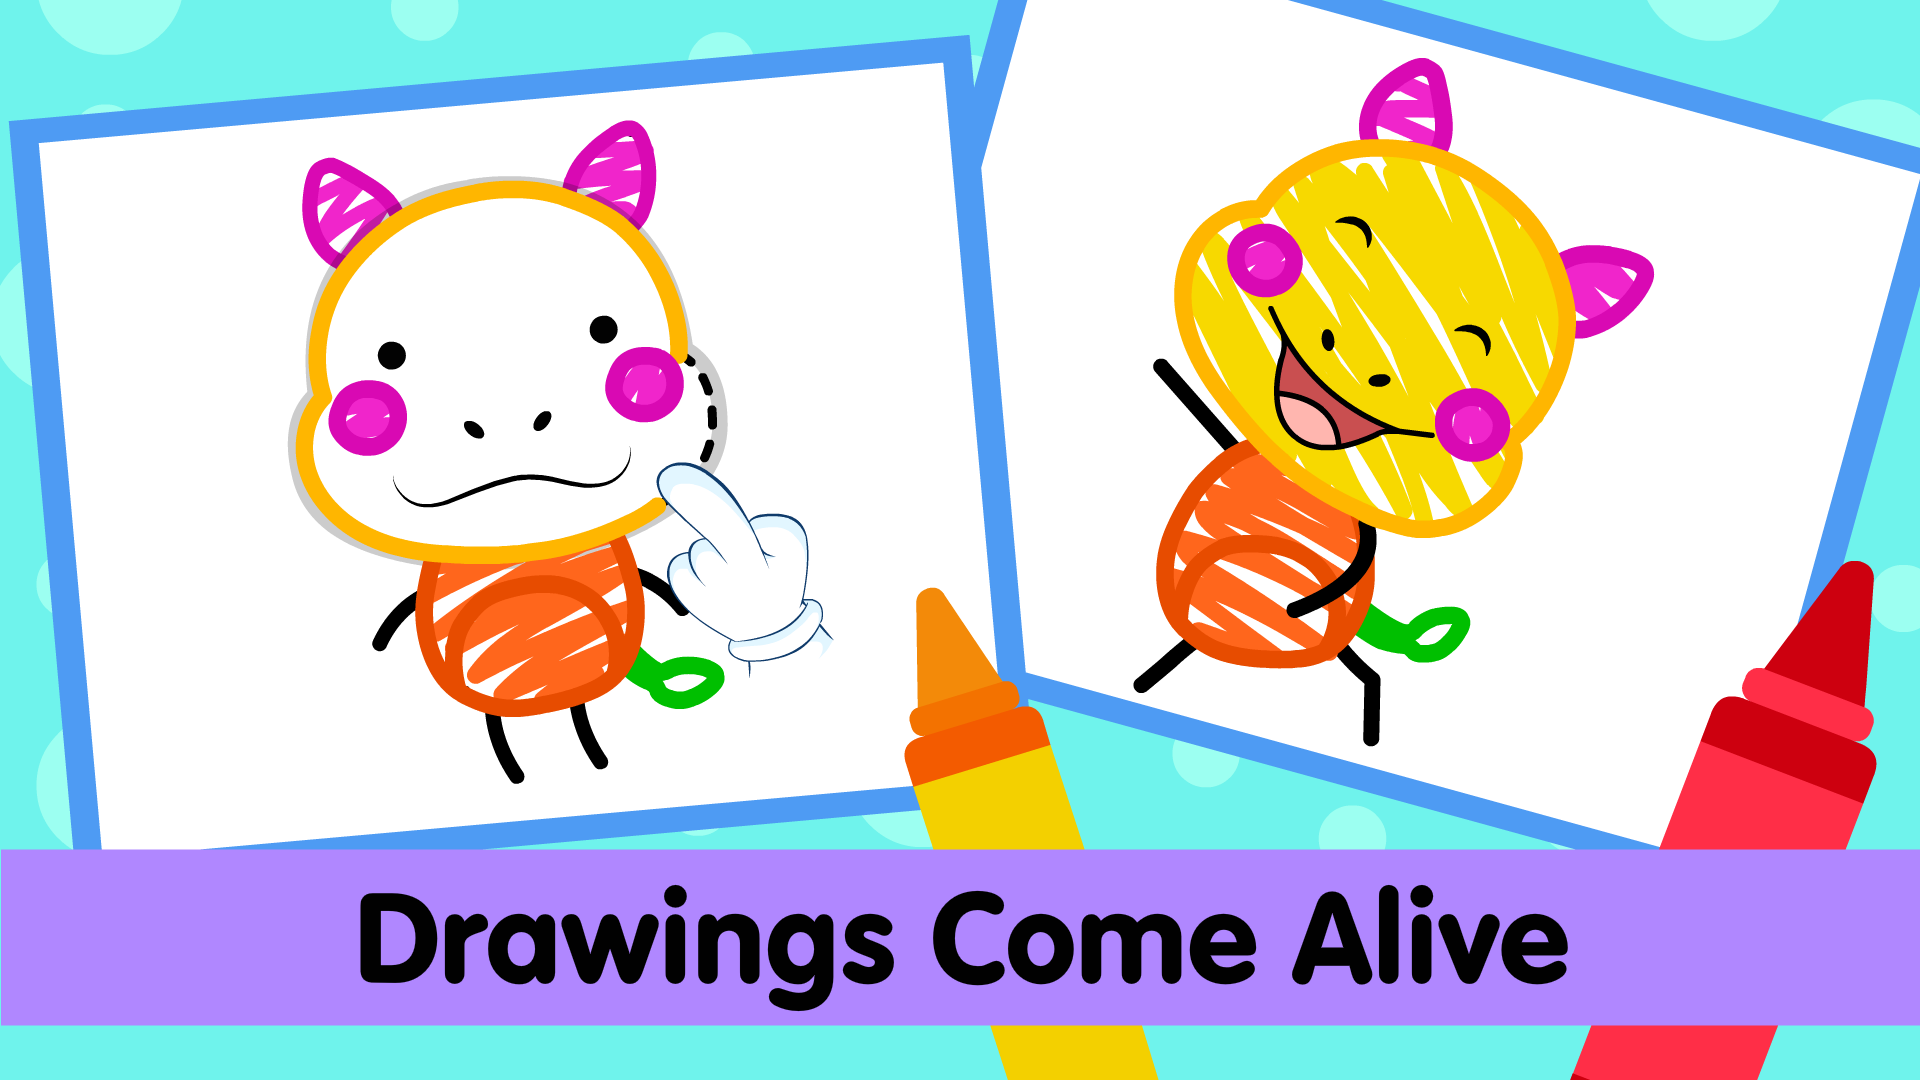 Drawing for Kids: Draw & Coloring Book, Kids Painting Games for Preschool Toddlers 2,3,4,5 Year Olds